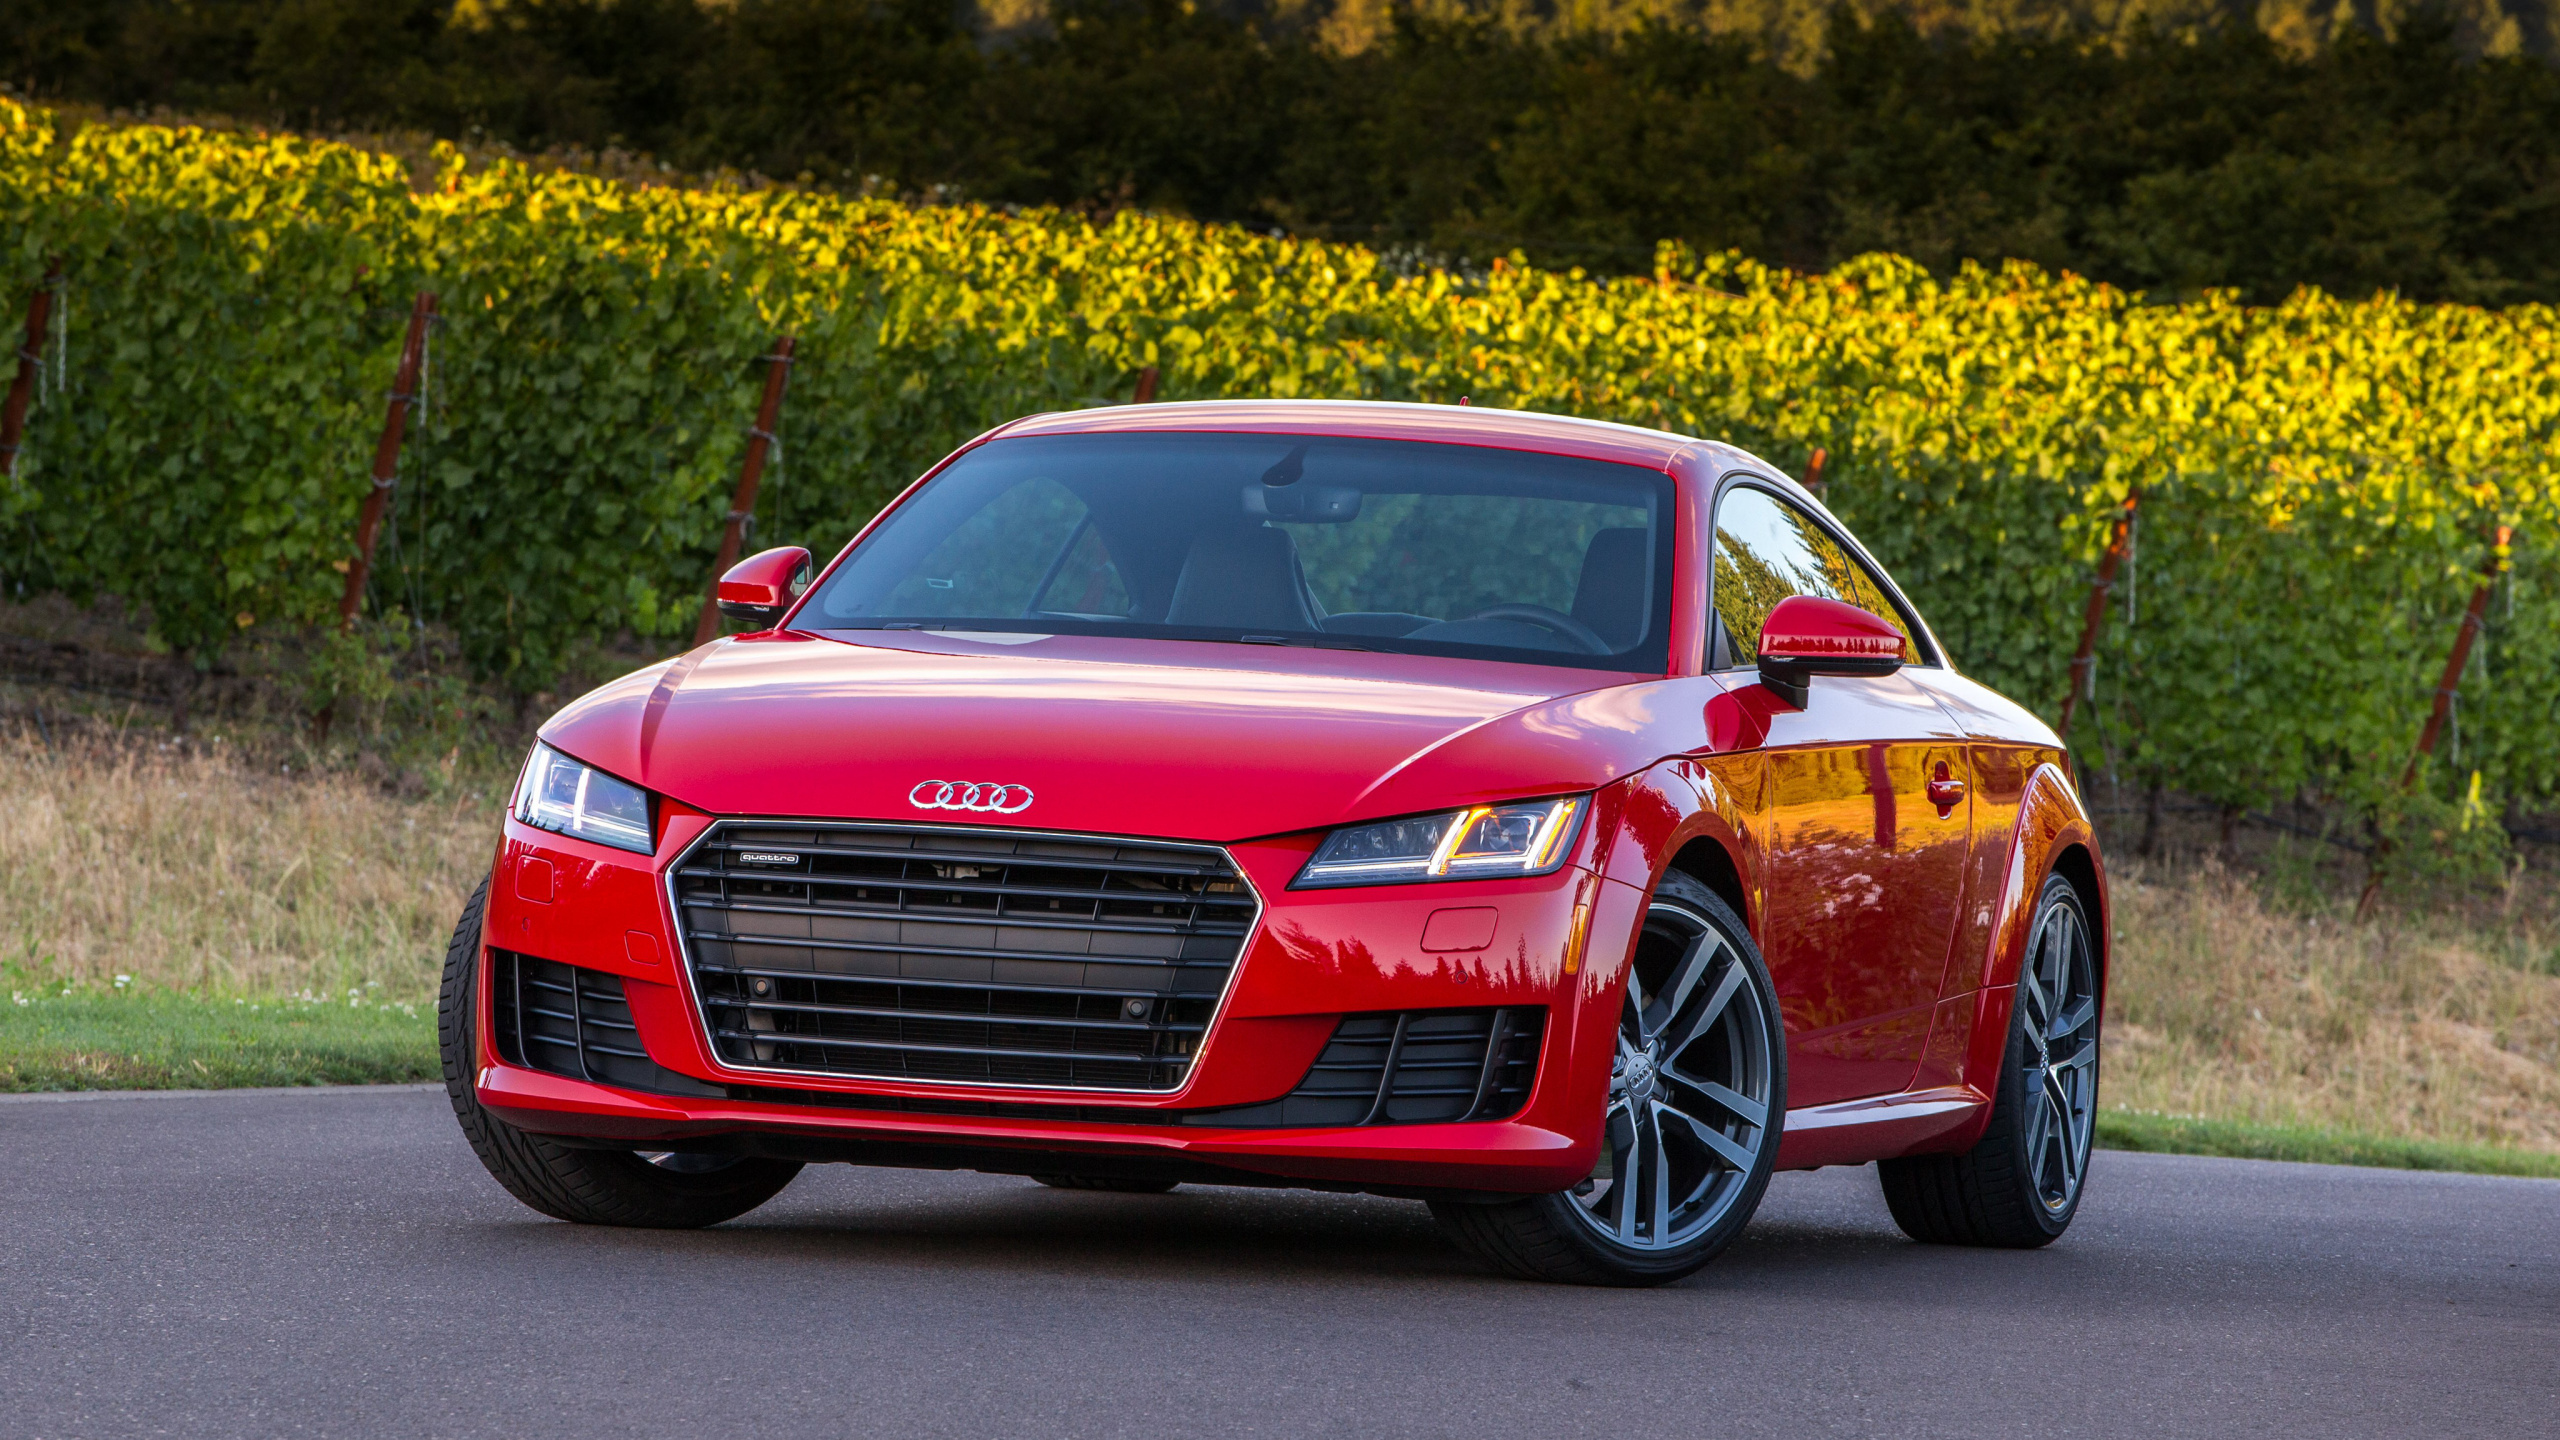 Red Audi Coupe on Road During Daytime. Wallpaper in 2560x1440 Resolution